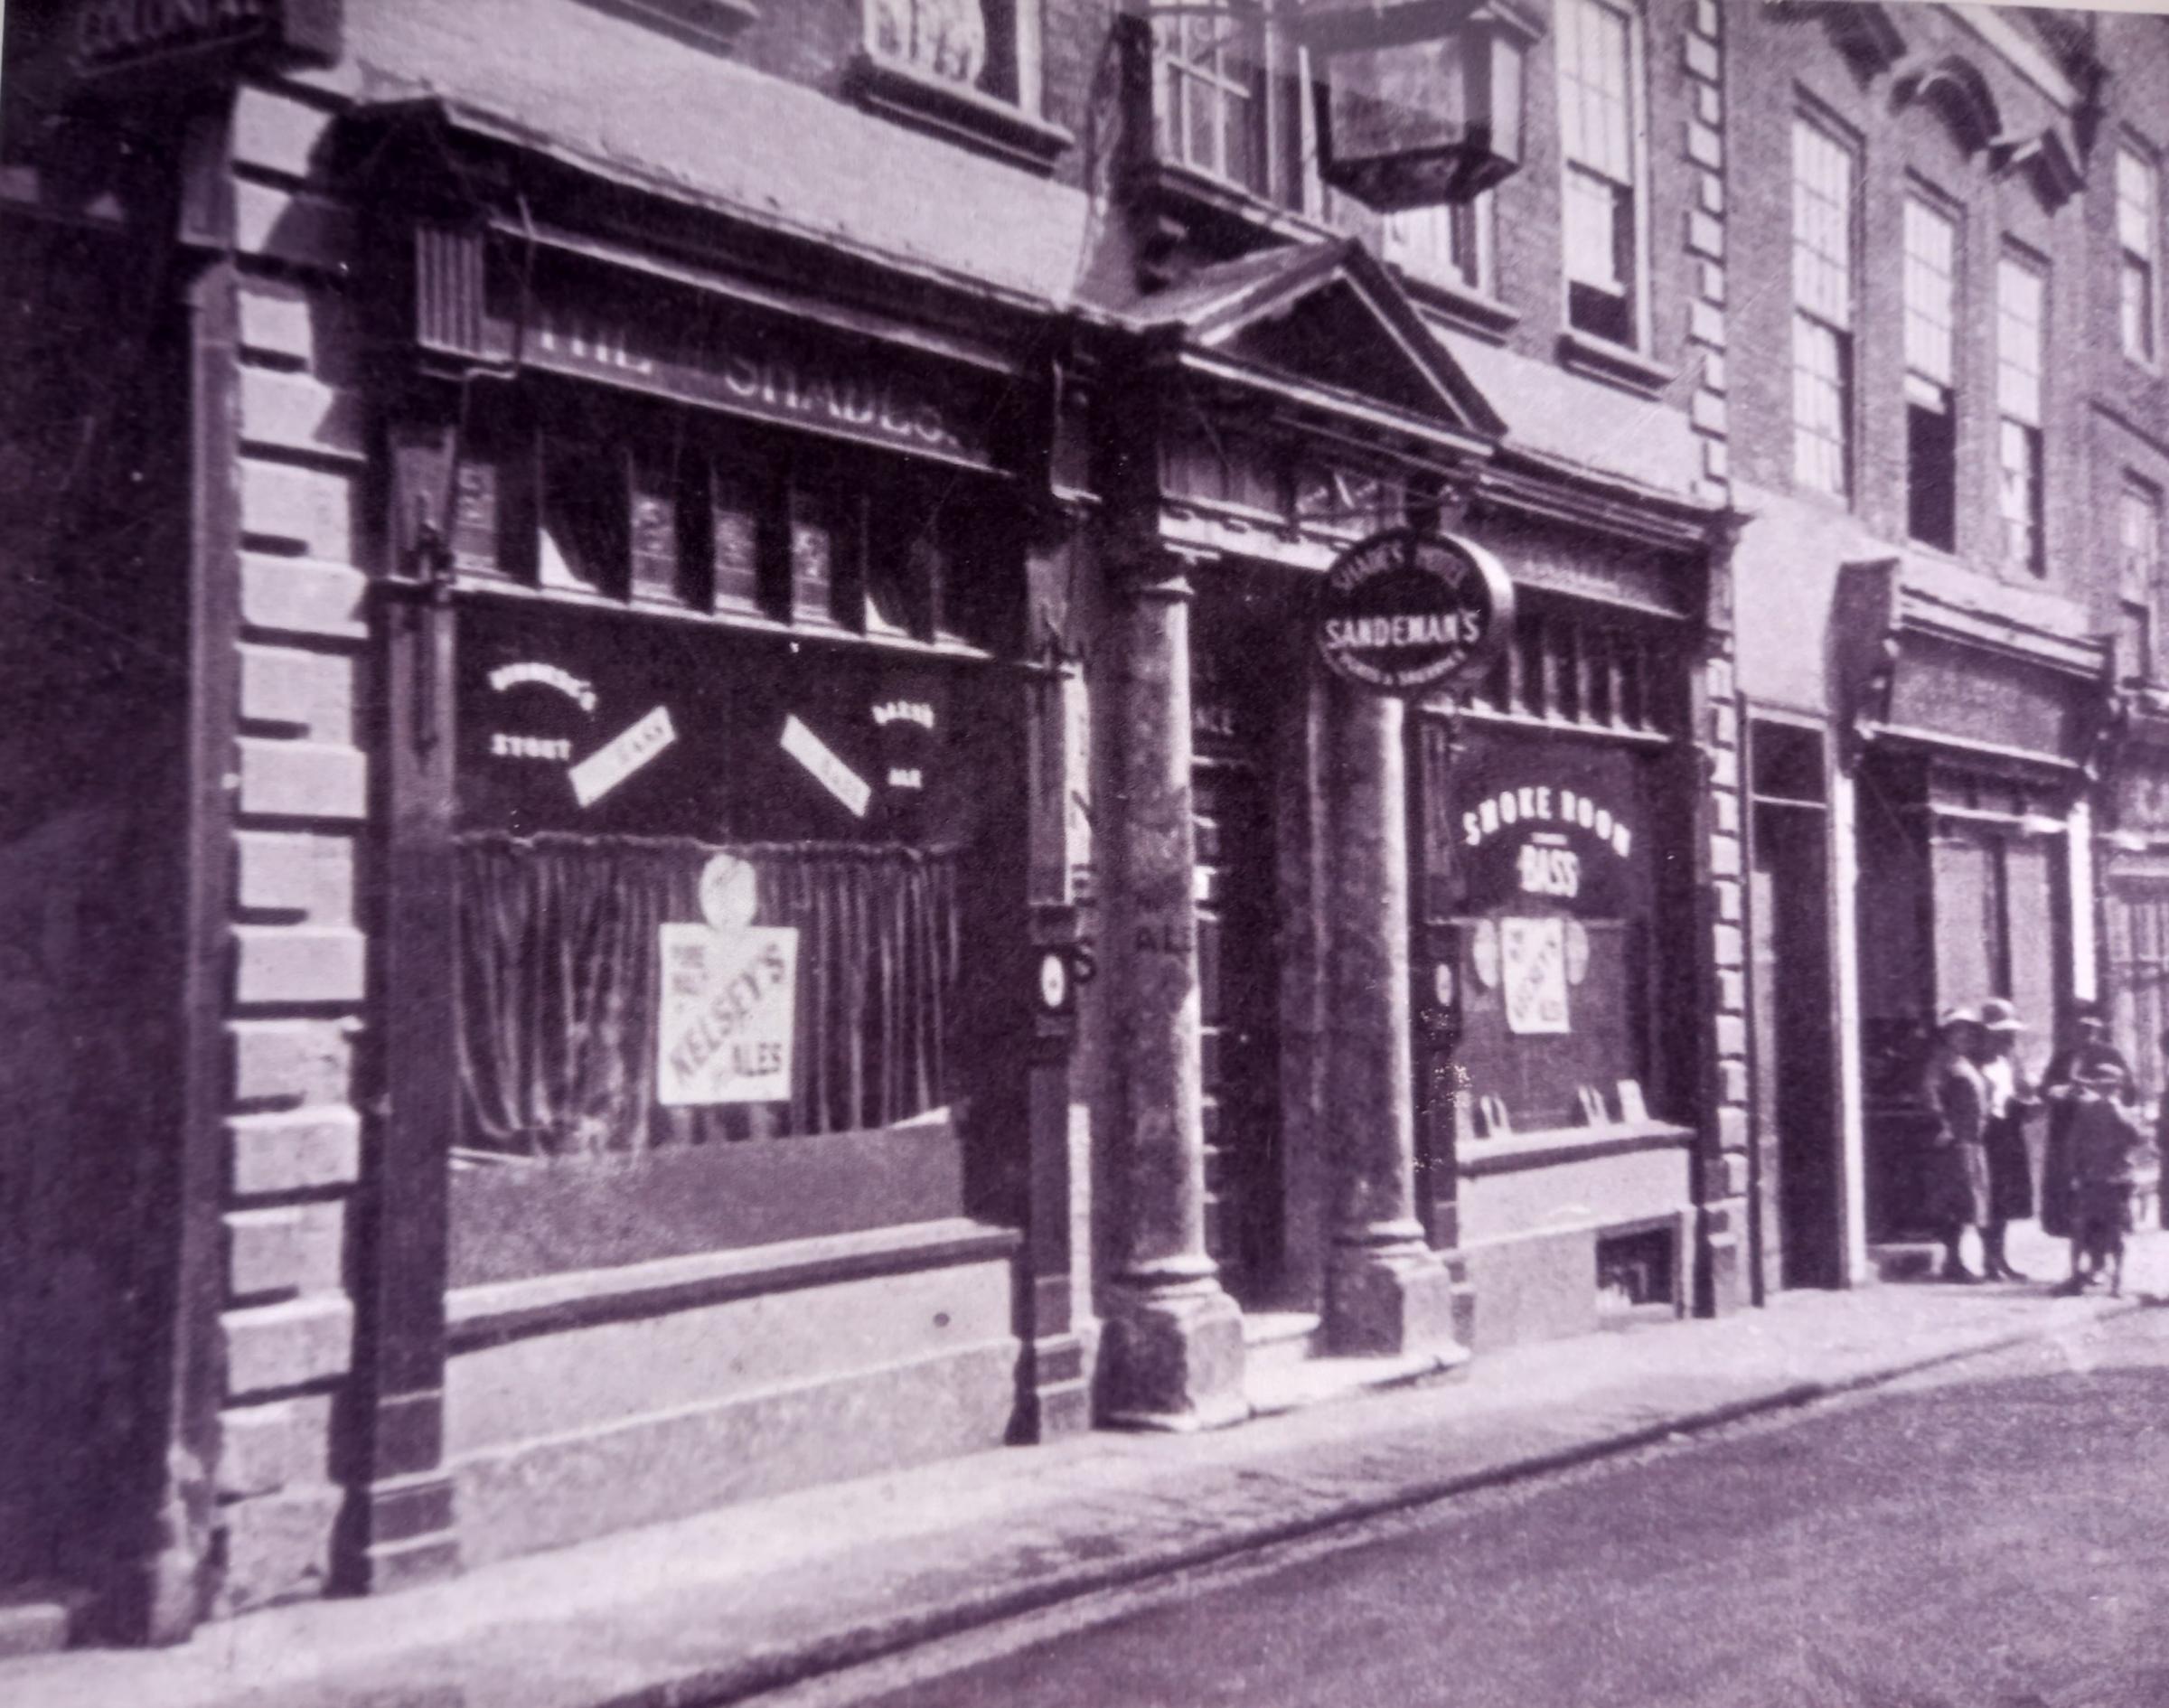 The Shades Tavern in Mealcheapen Street. The property was the original home of Worcester Post Office